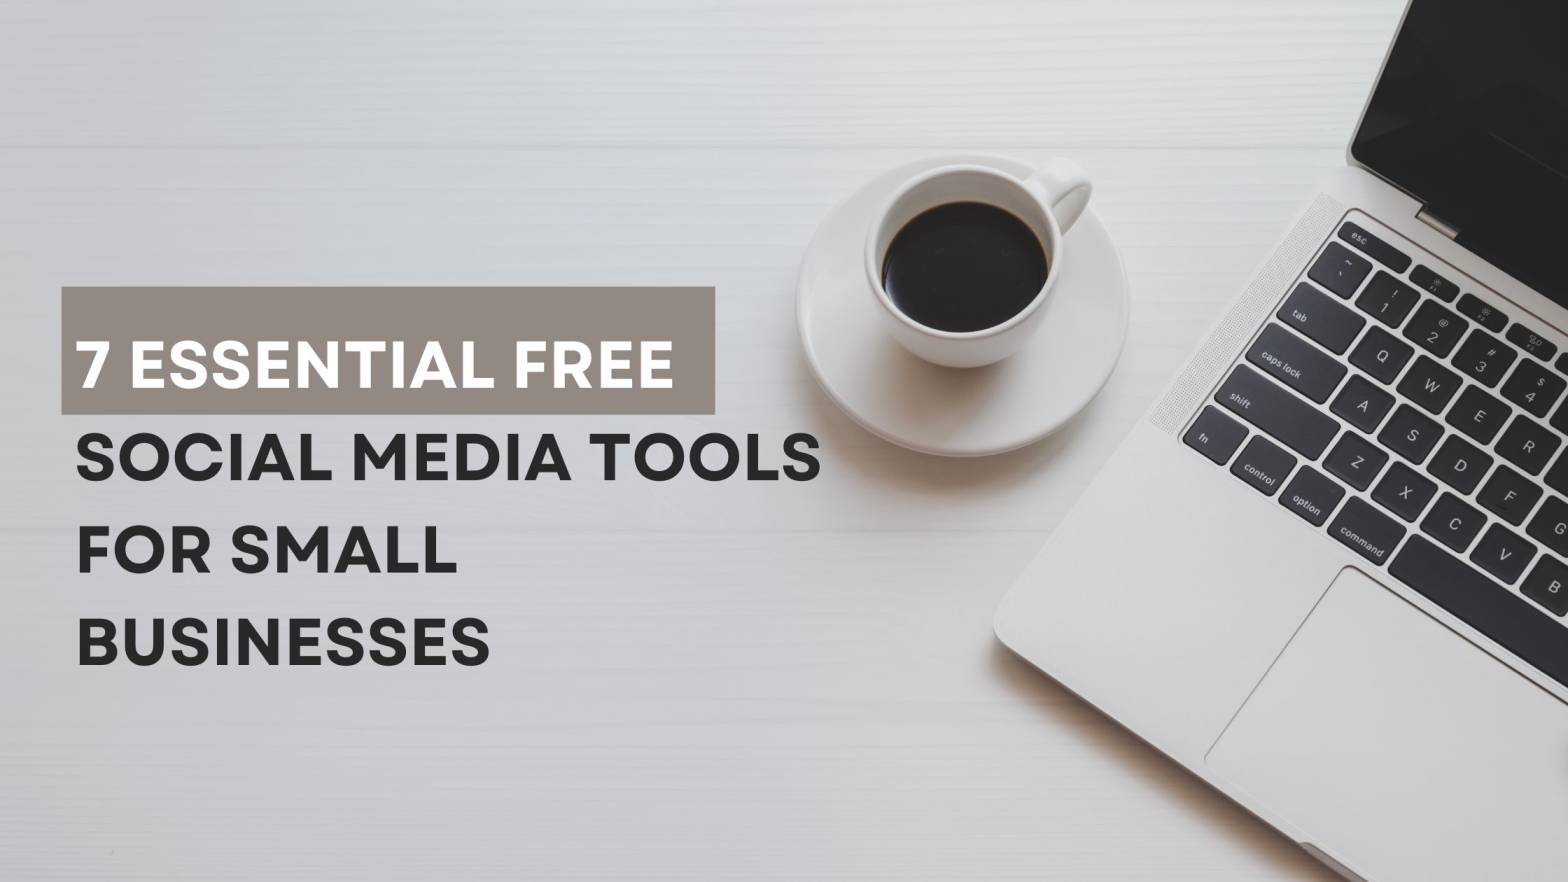 7 Essential Free Social Media Tools for Small Businesses